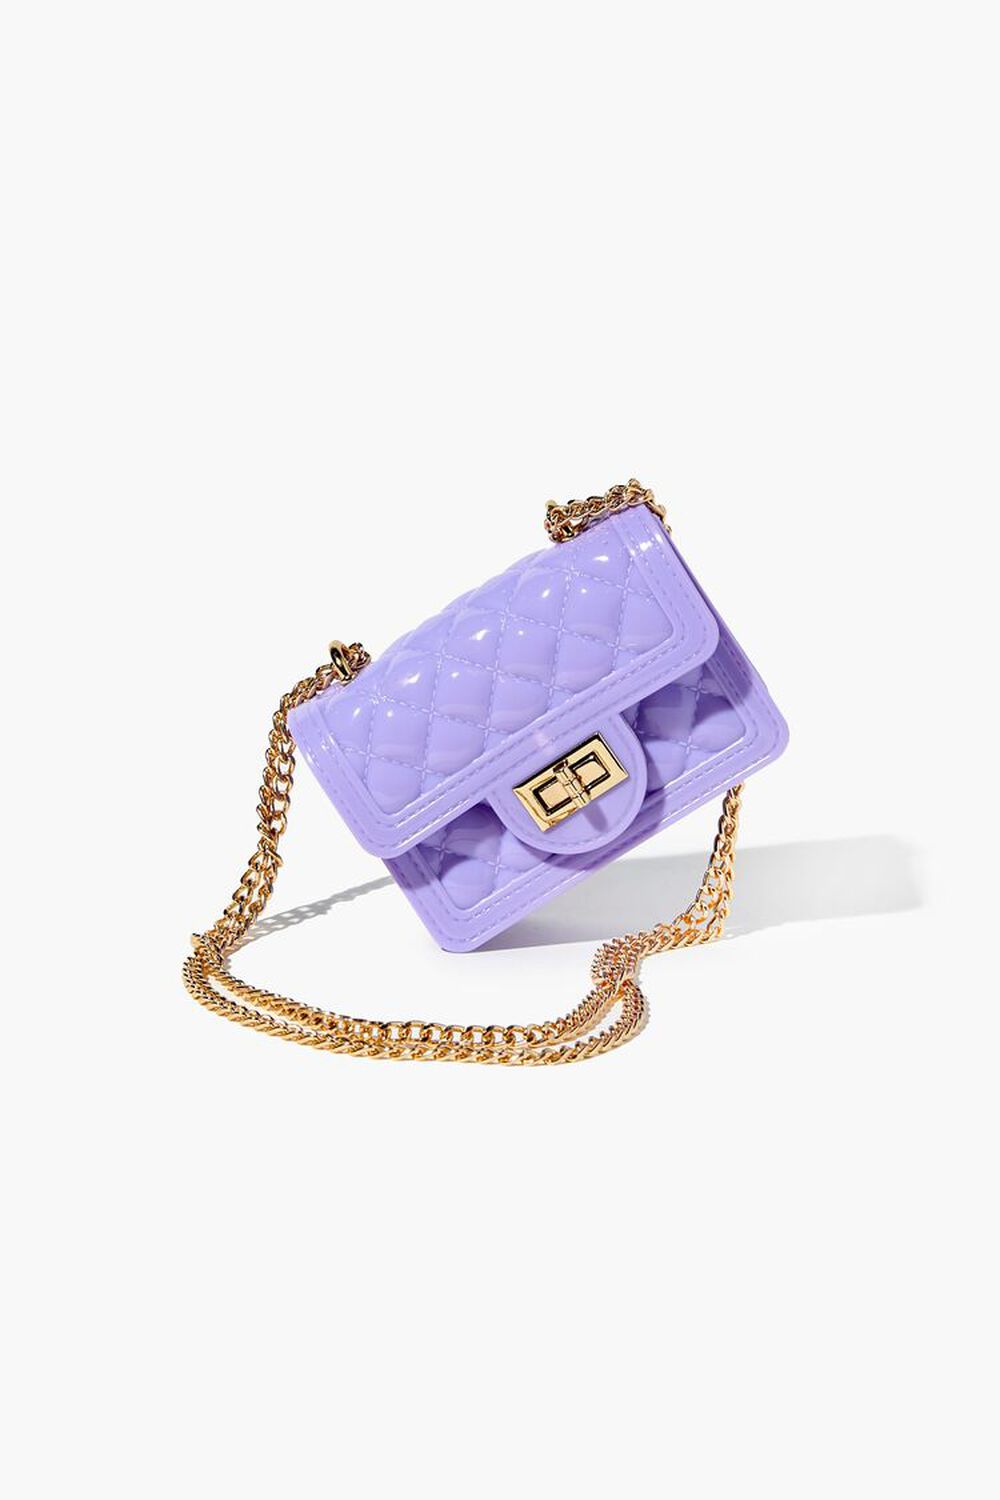 PURPLE Quilted Crossbody Bag, image 1